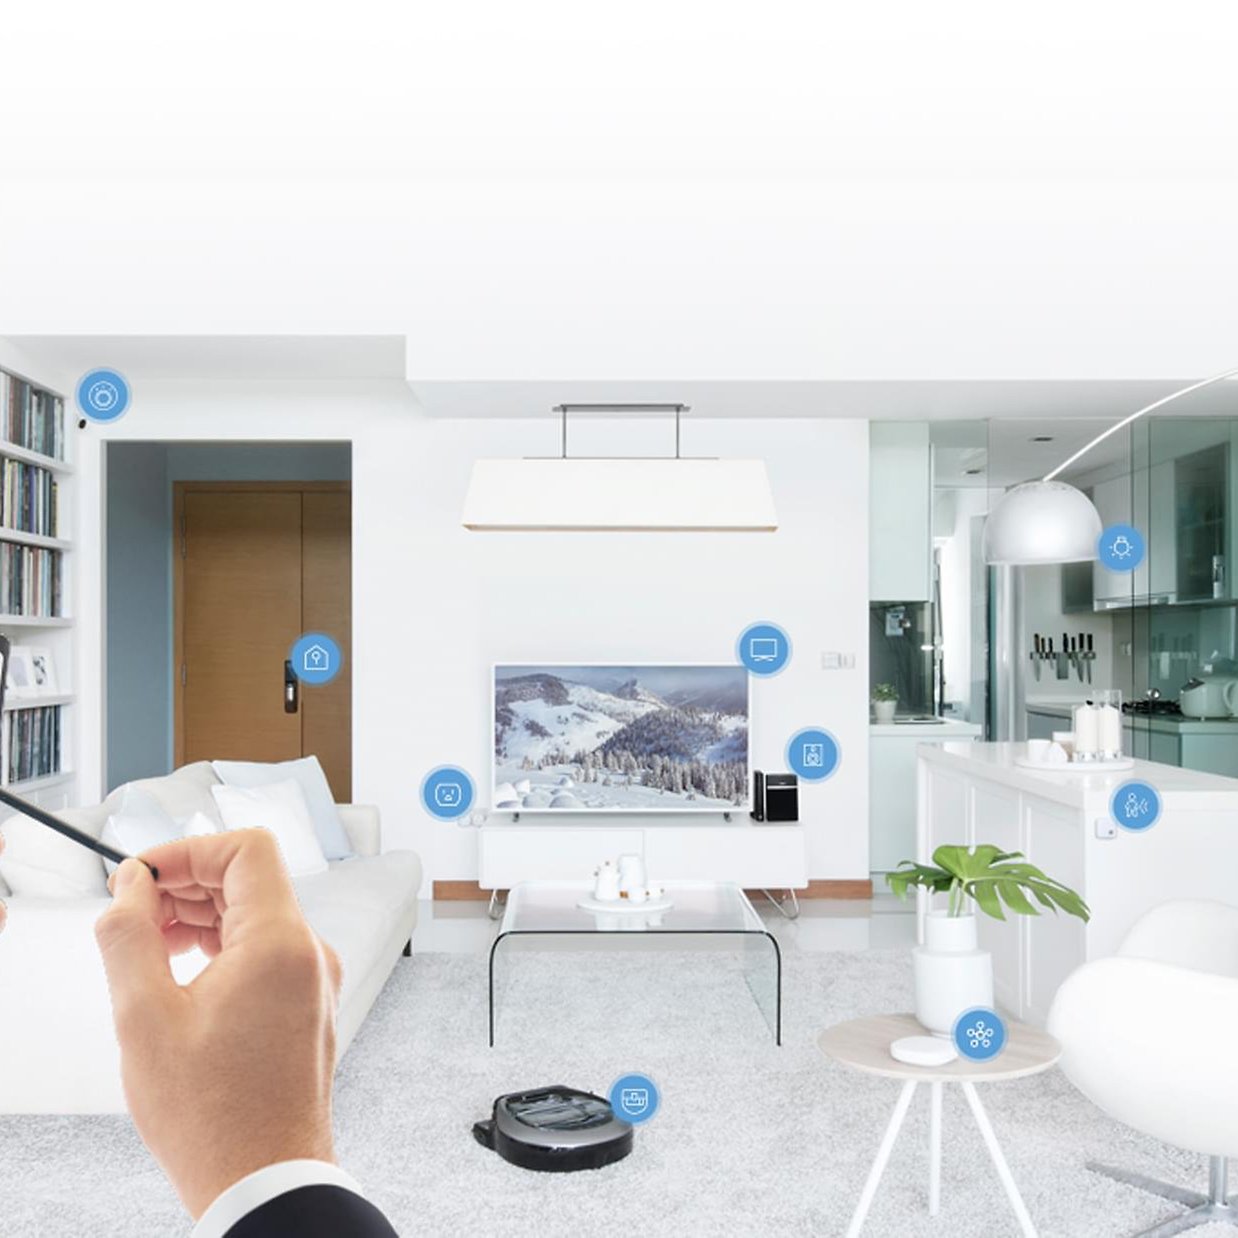 13 REASONS NOT TO D.I.Y. YOUR SMART HOME